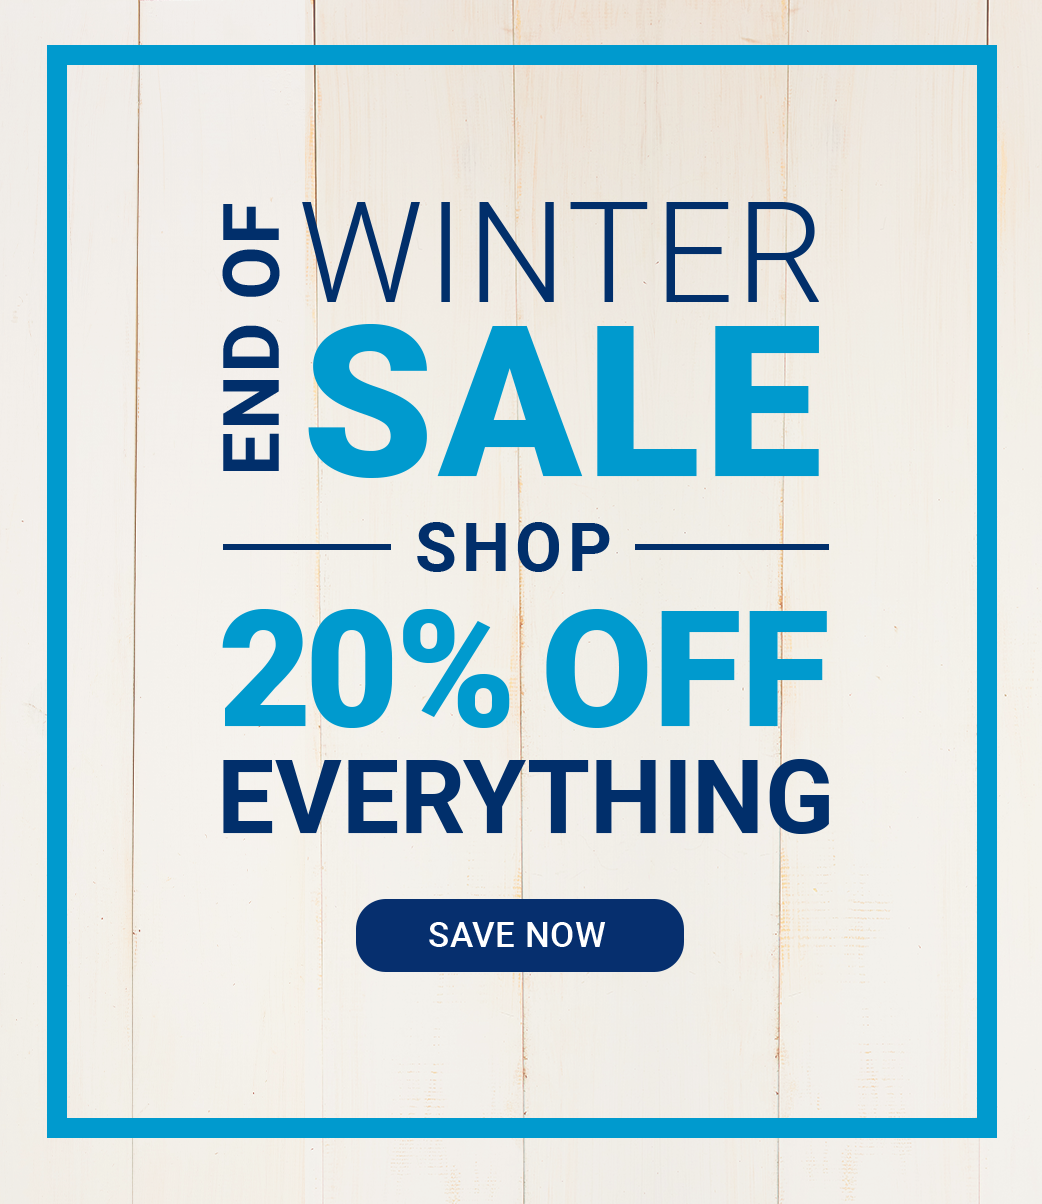 END OF WINTER SALE SHOP 20% OFF EVERYTHING [SAVE NOW]